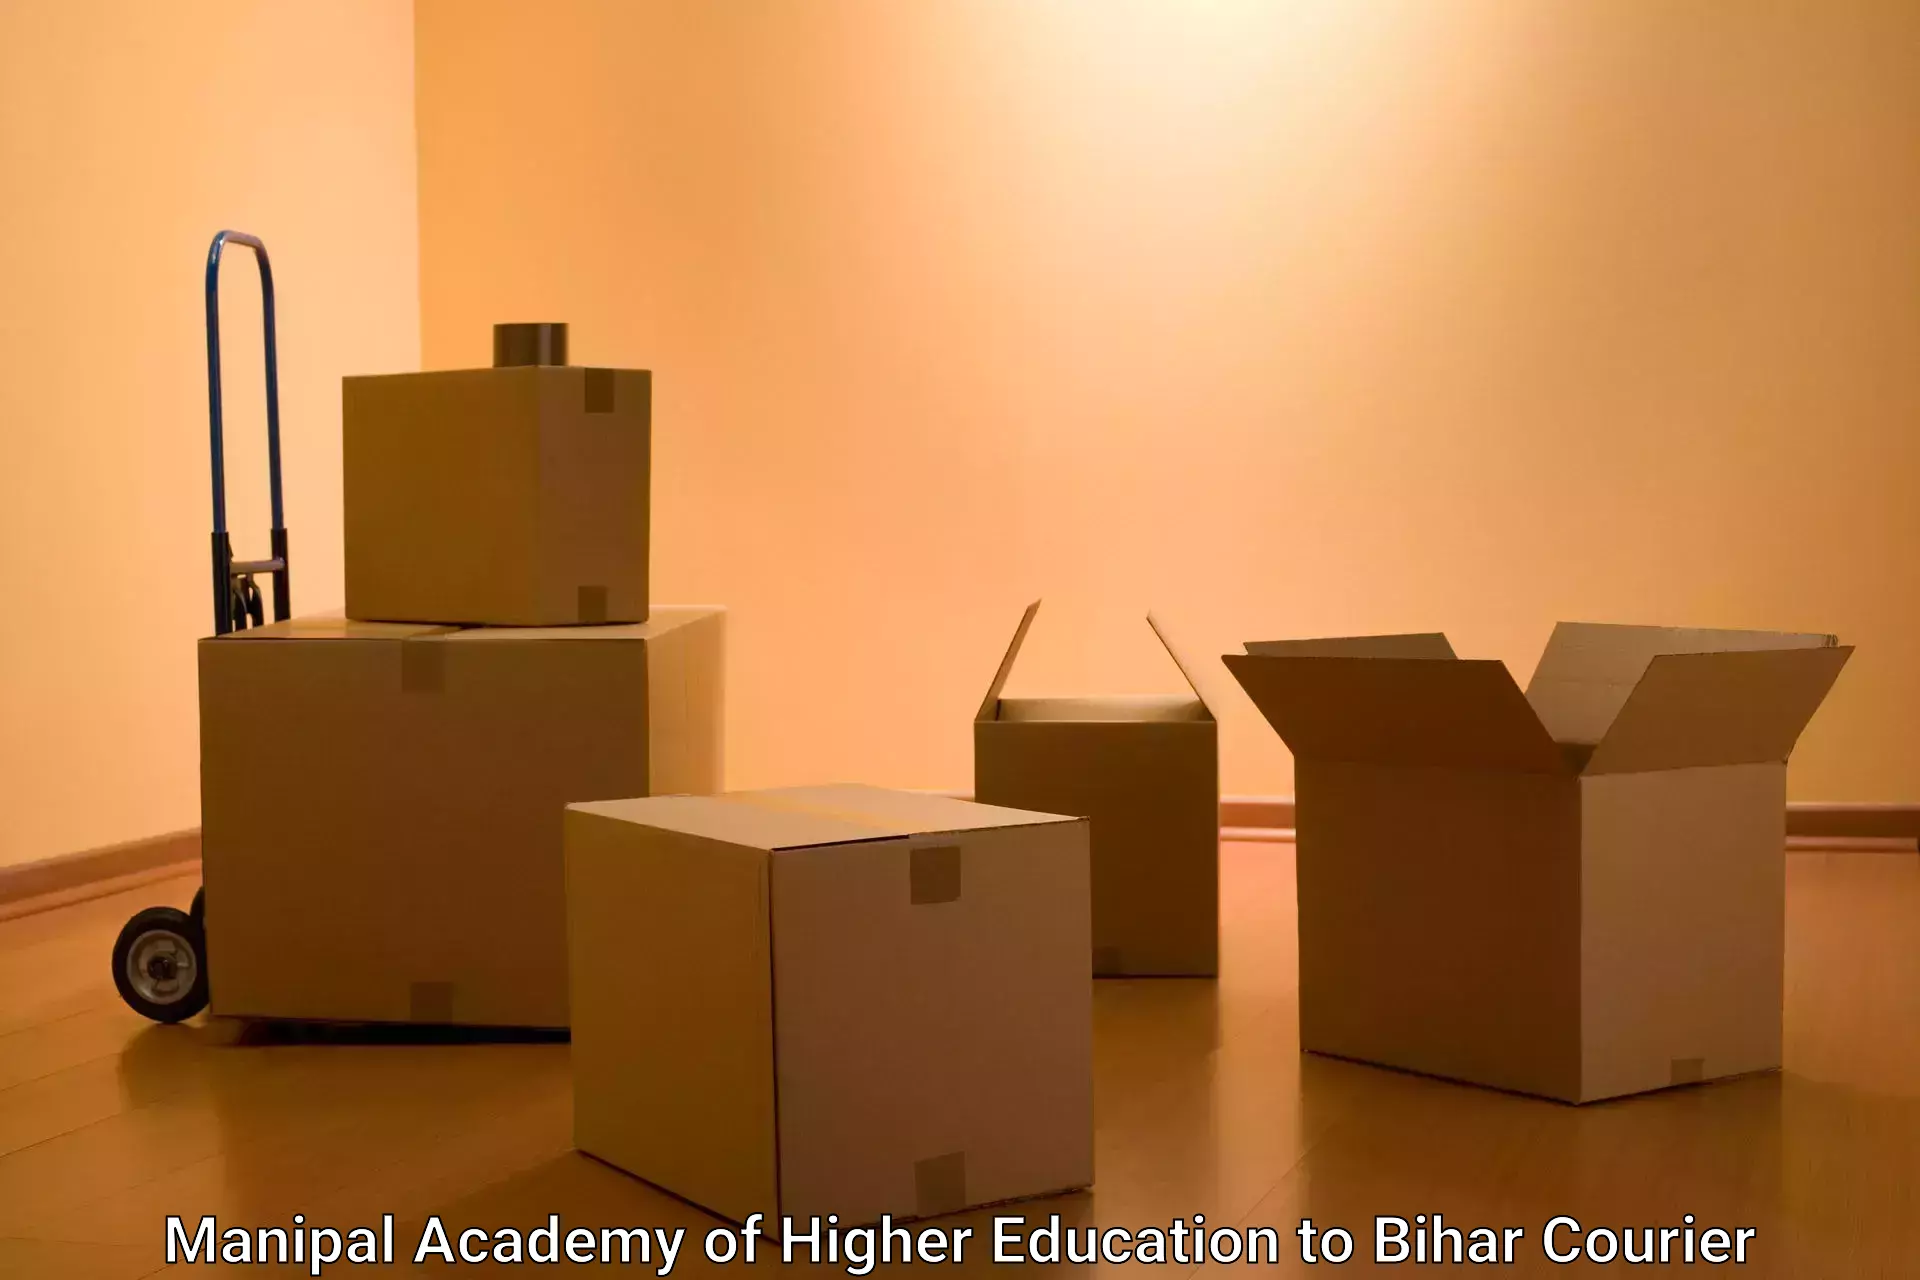 Efficient order fulfillment Manipal Academy of Higher Education to Sikandara Jamui